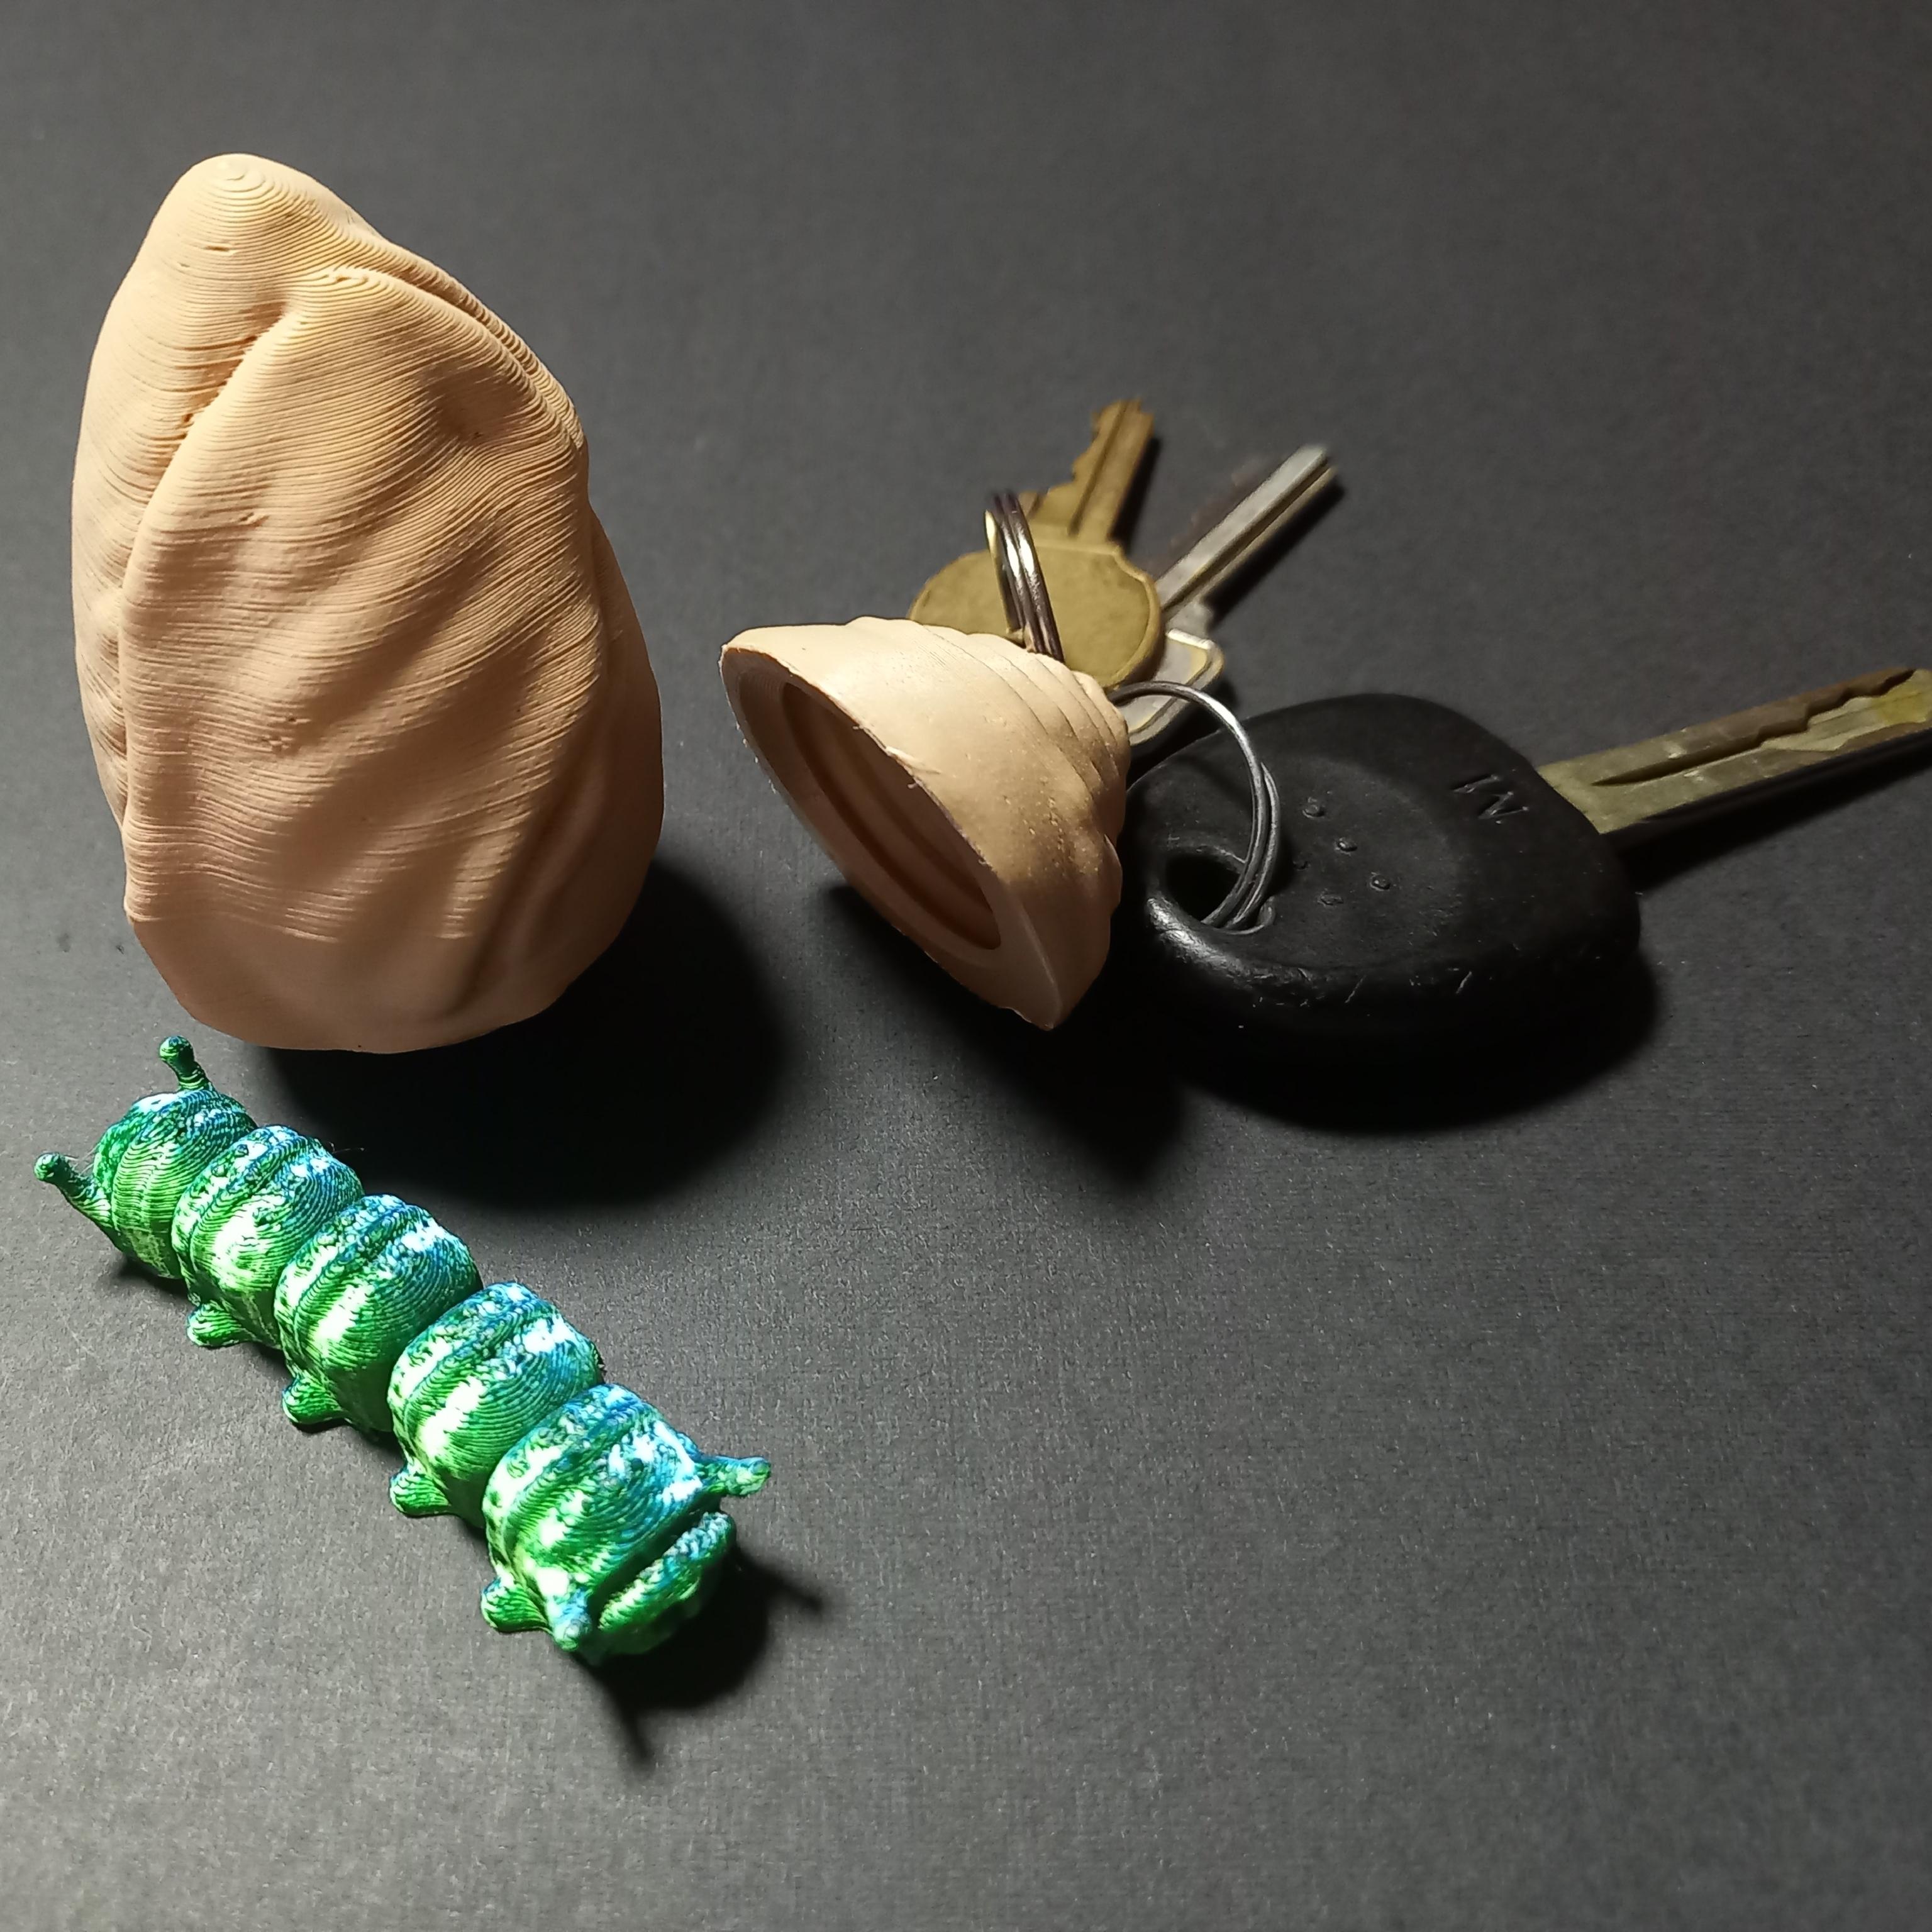 FLEXI CATERPILLAR IN COCOON CONTAINER KEYCHAIN  3d model